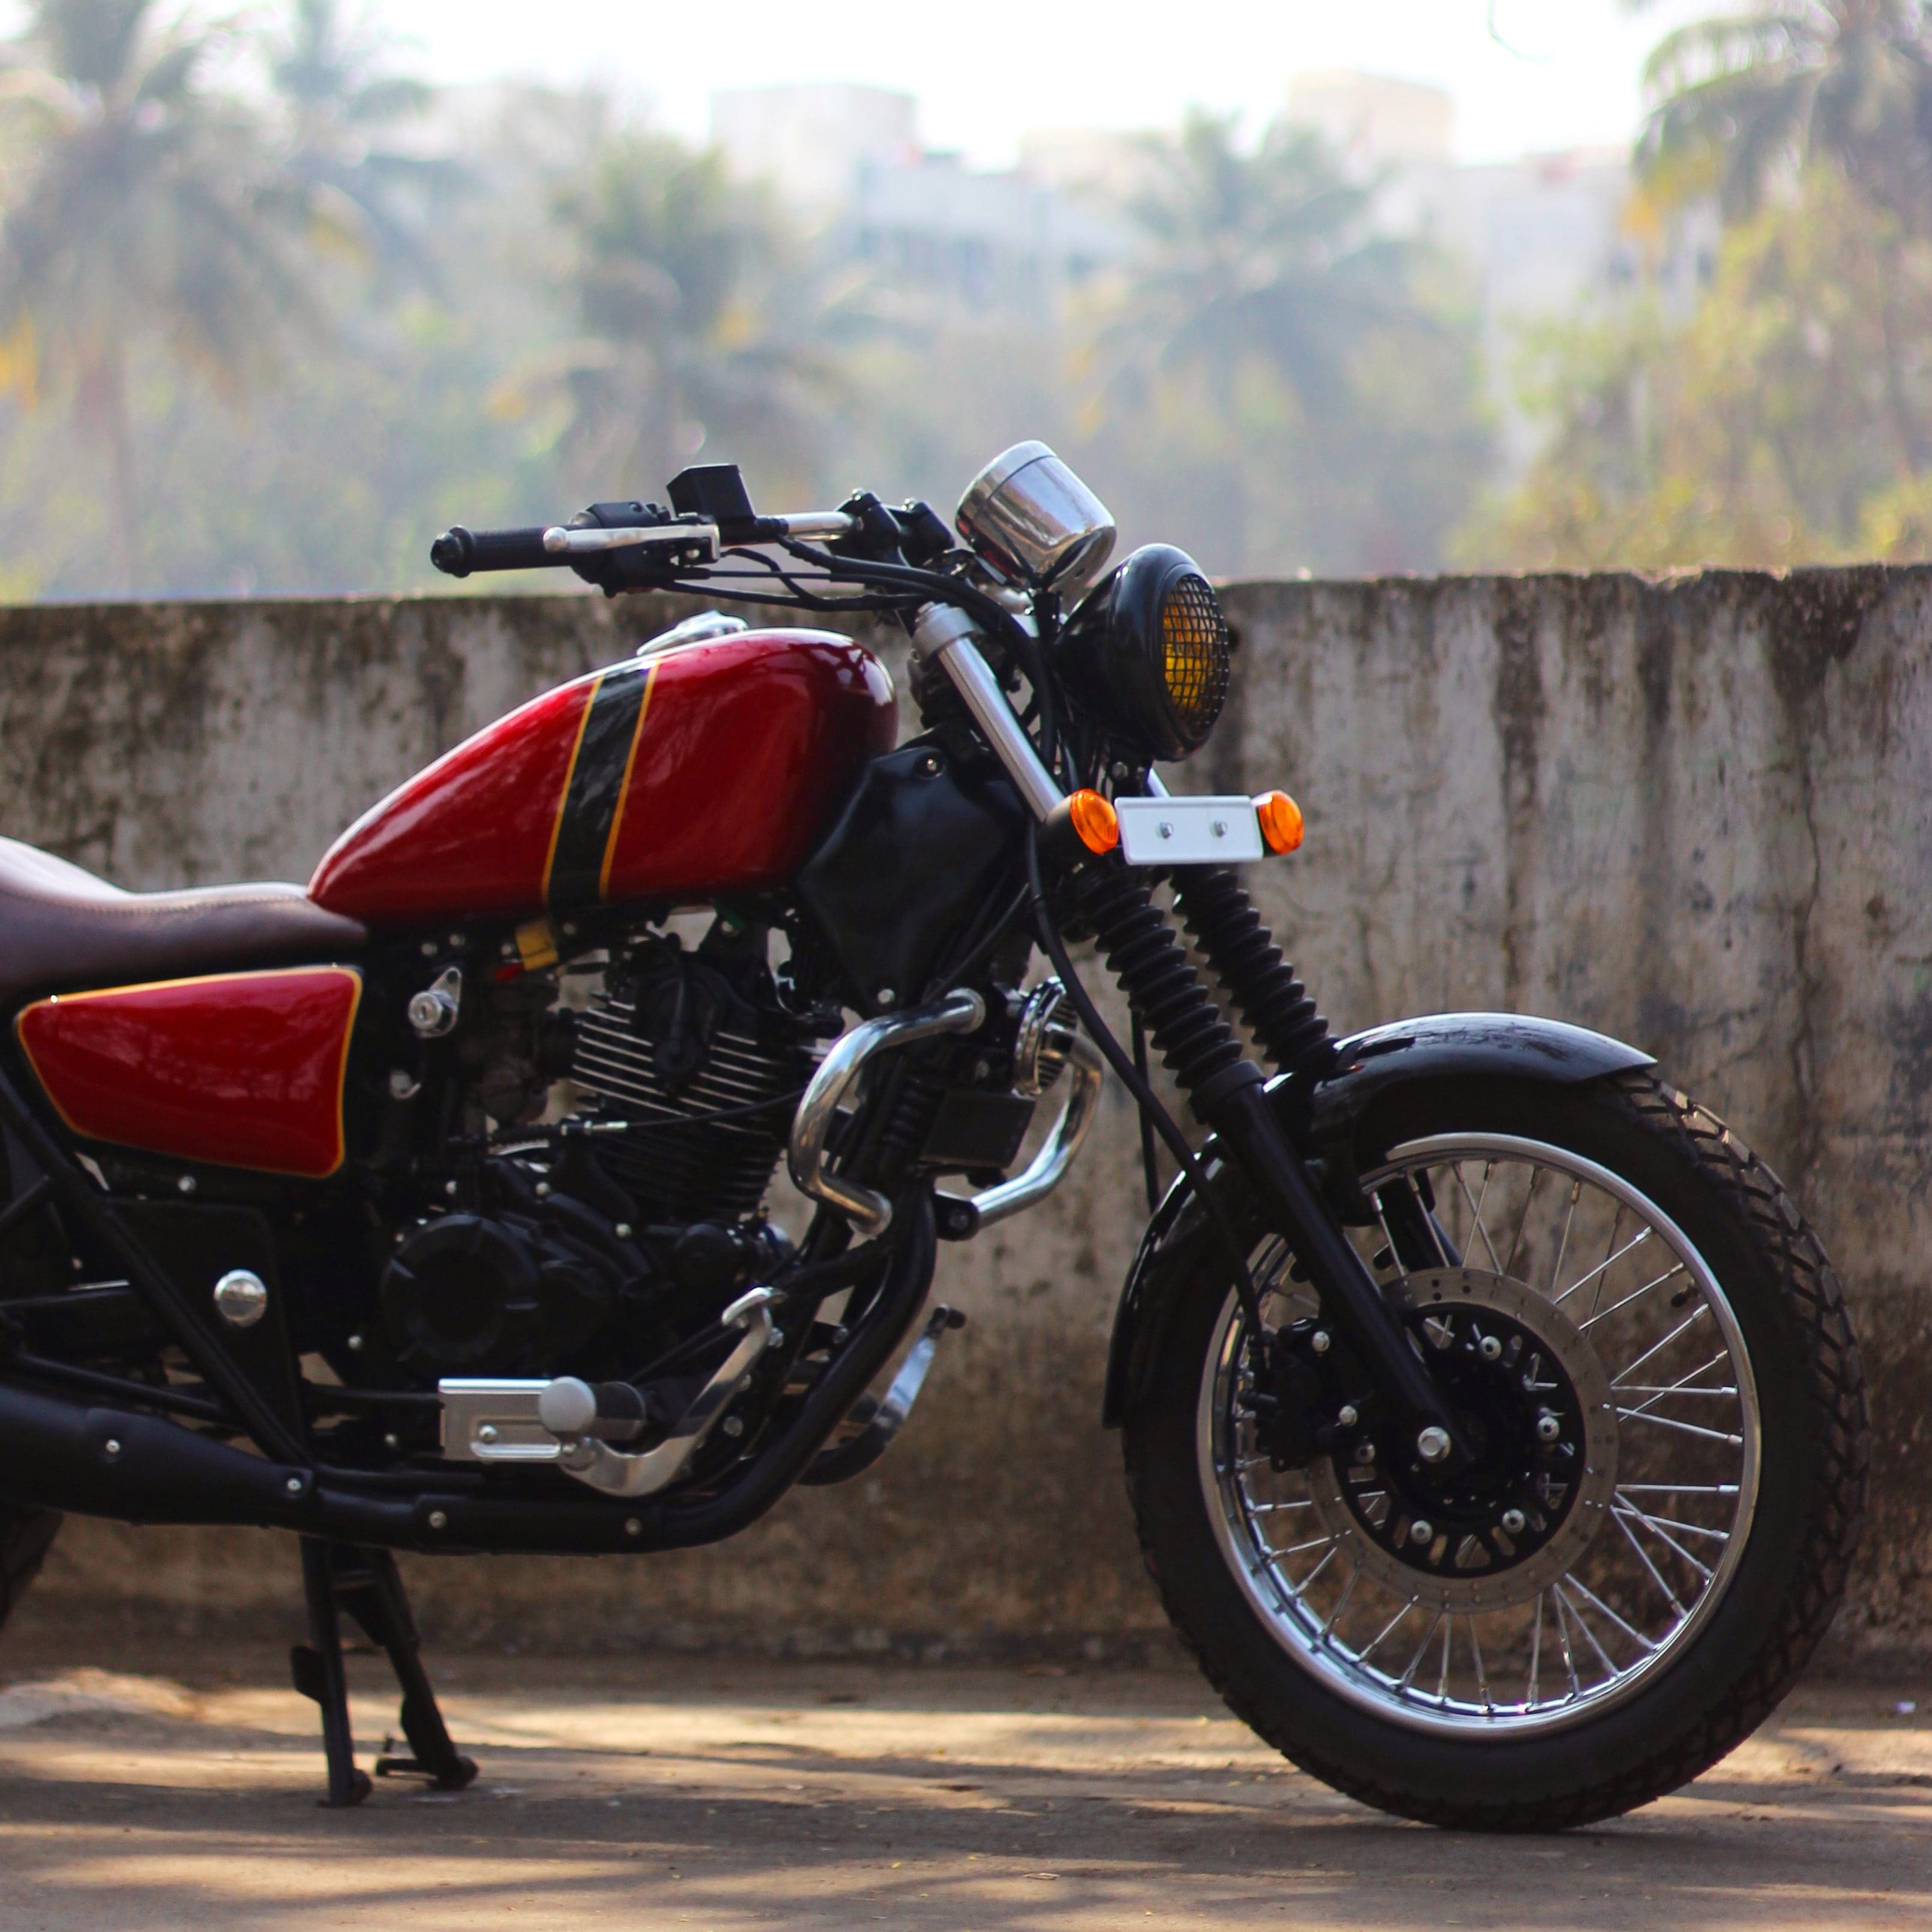 Meet Perfectly-Modified Bajaj Avenger Cruiser Motorcycle by JEDI Customs - background